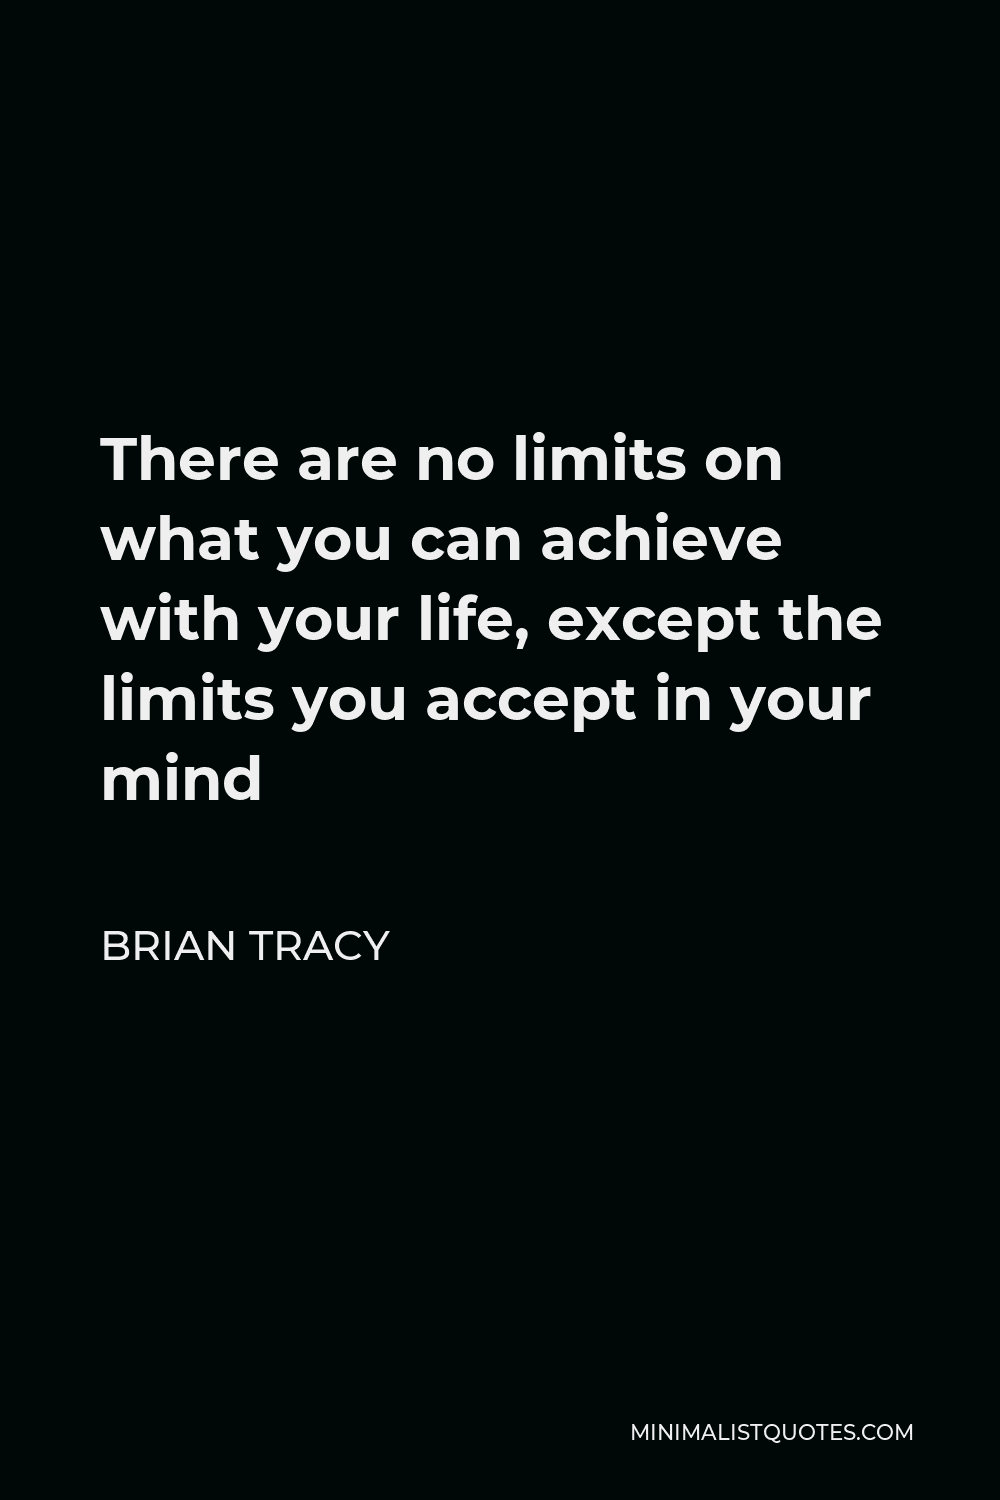 Brian Tracy Quote - There are no limits on what you can achieve with your life, except the limits you accept in your mind